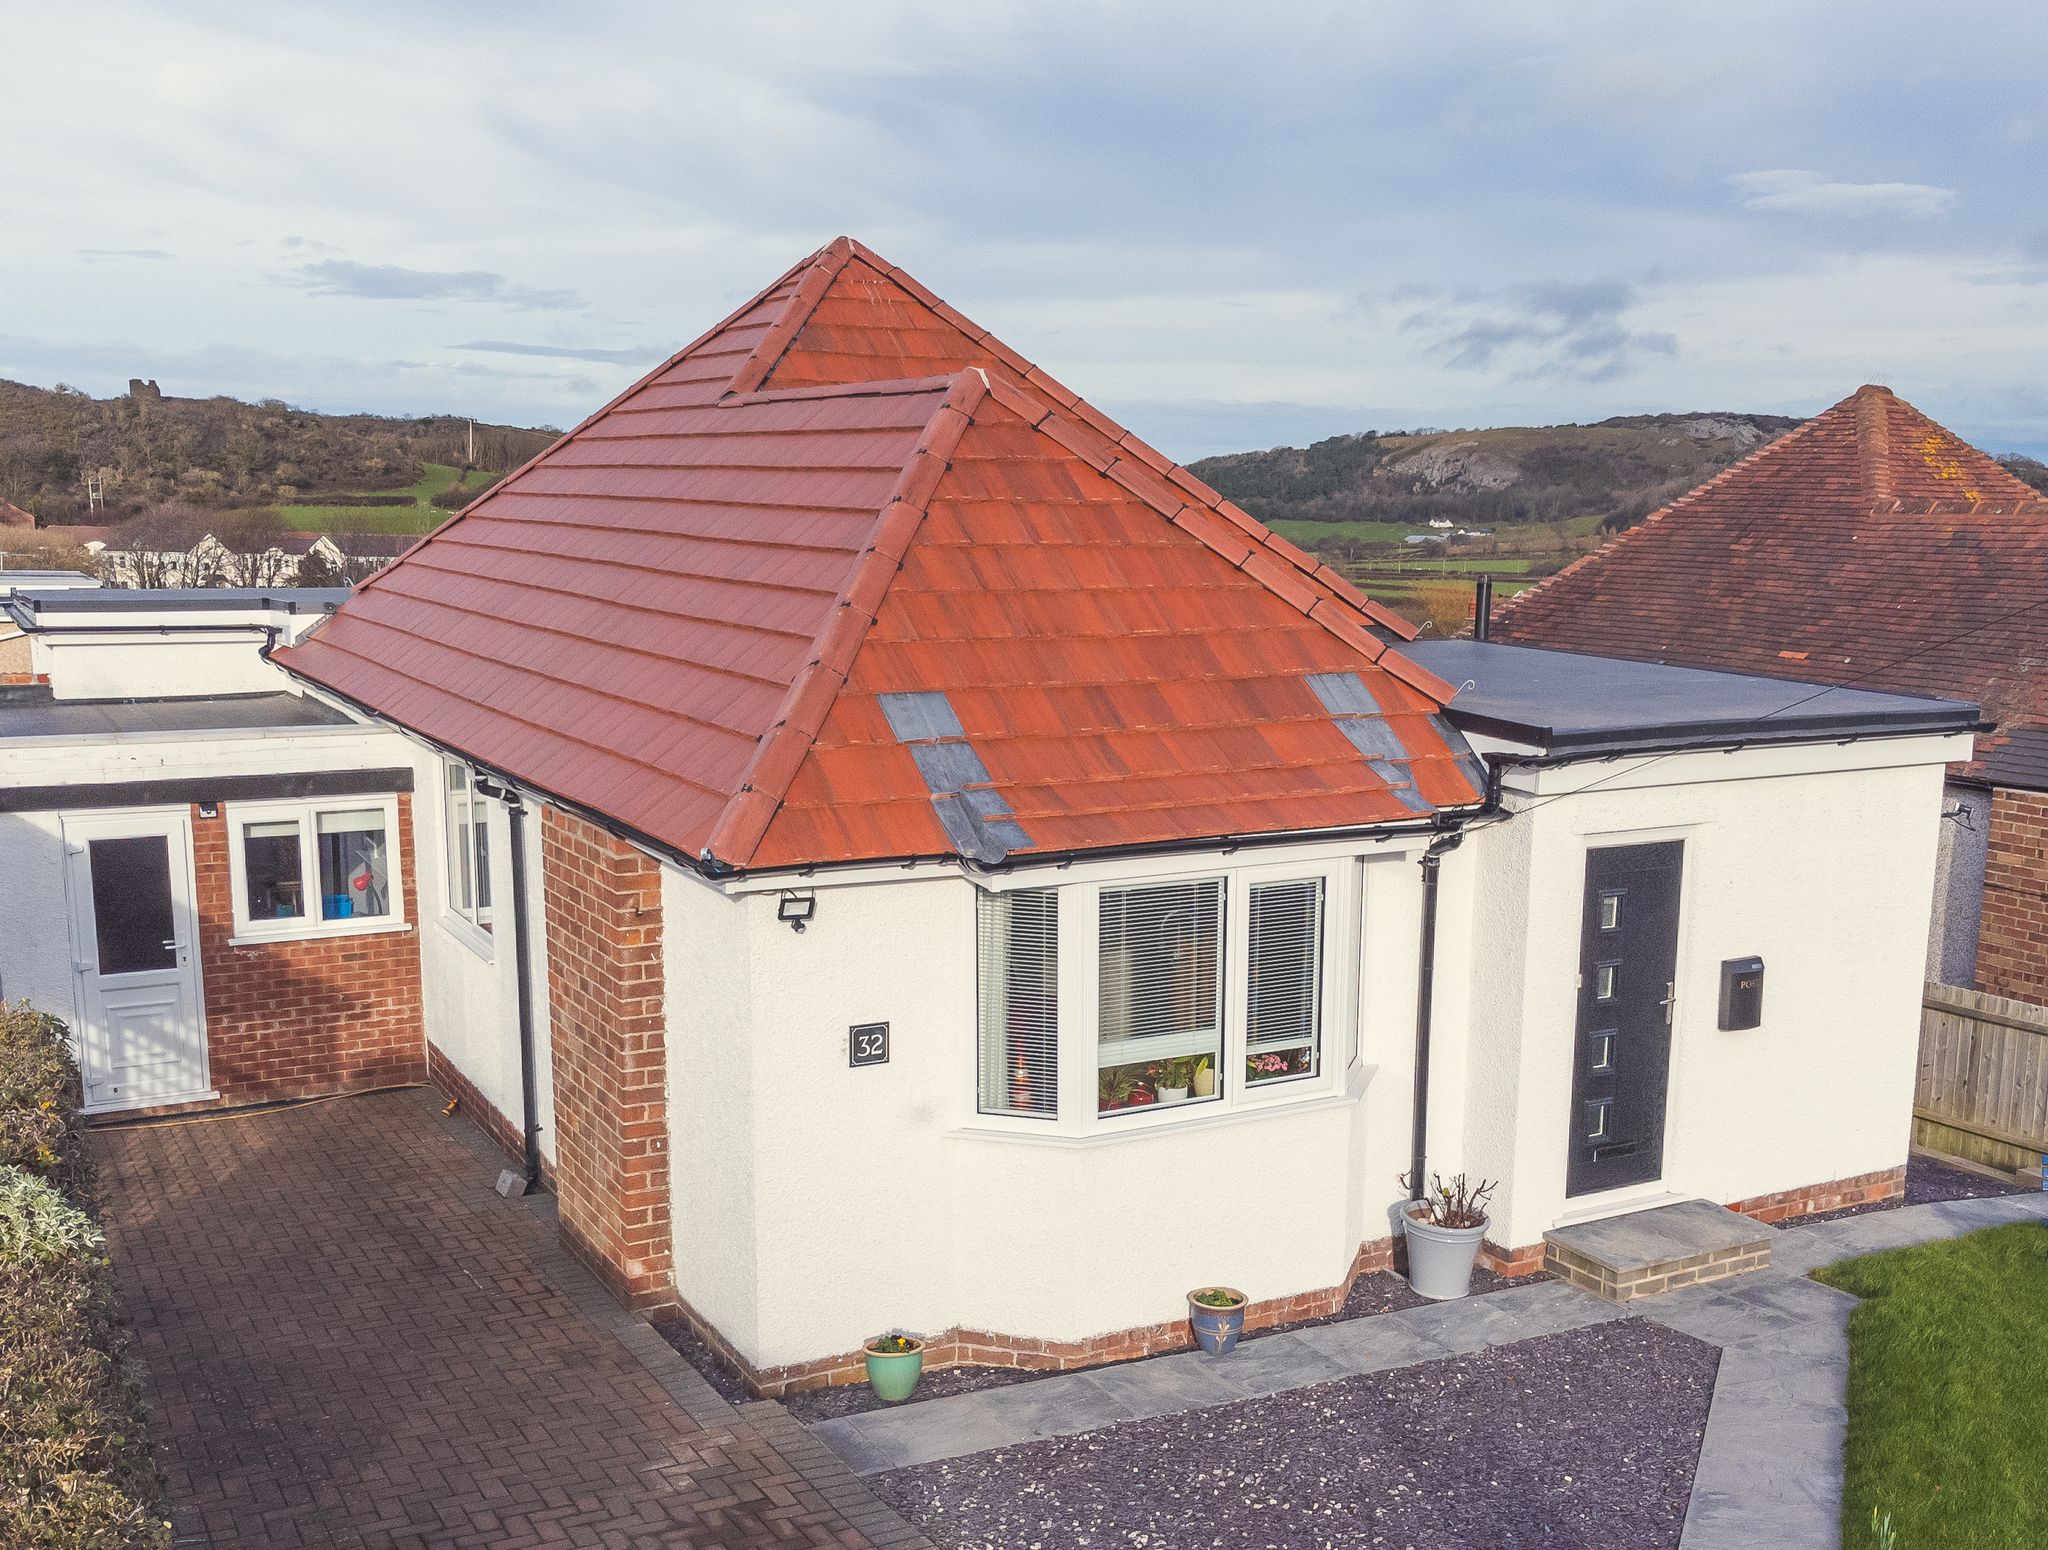 Tile Roof Contractors Terfyn, LL18 - DD Roofing